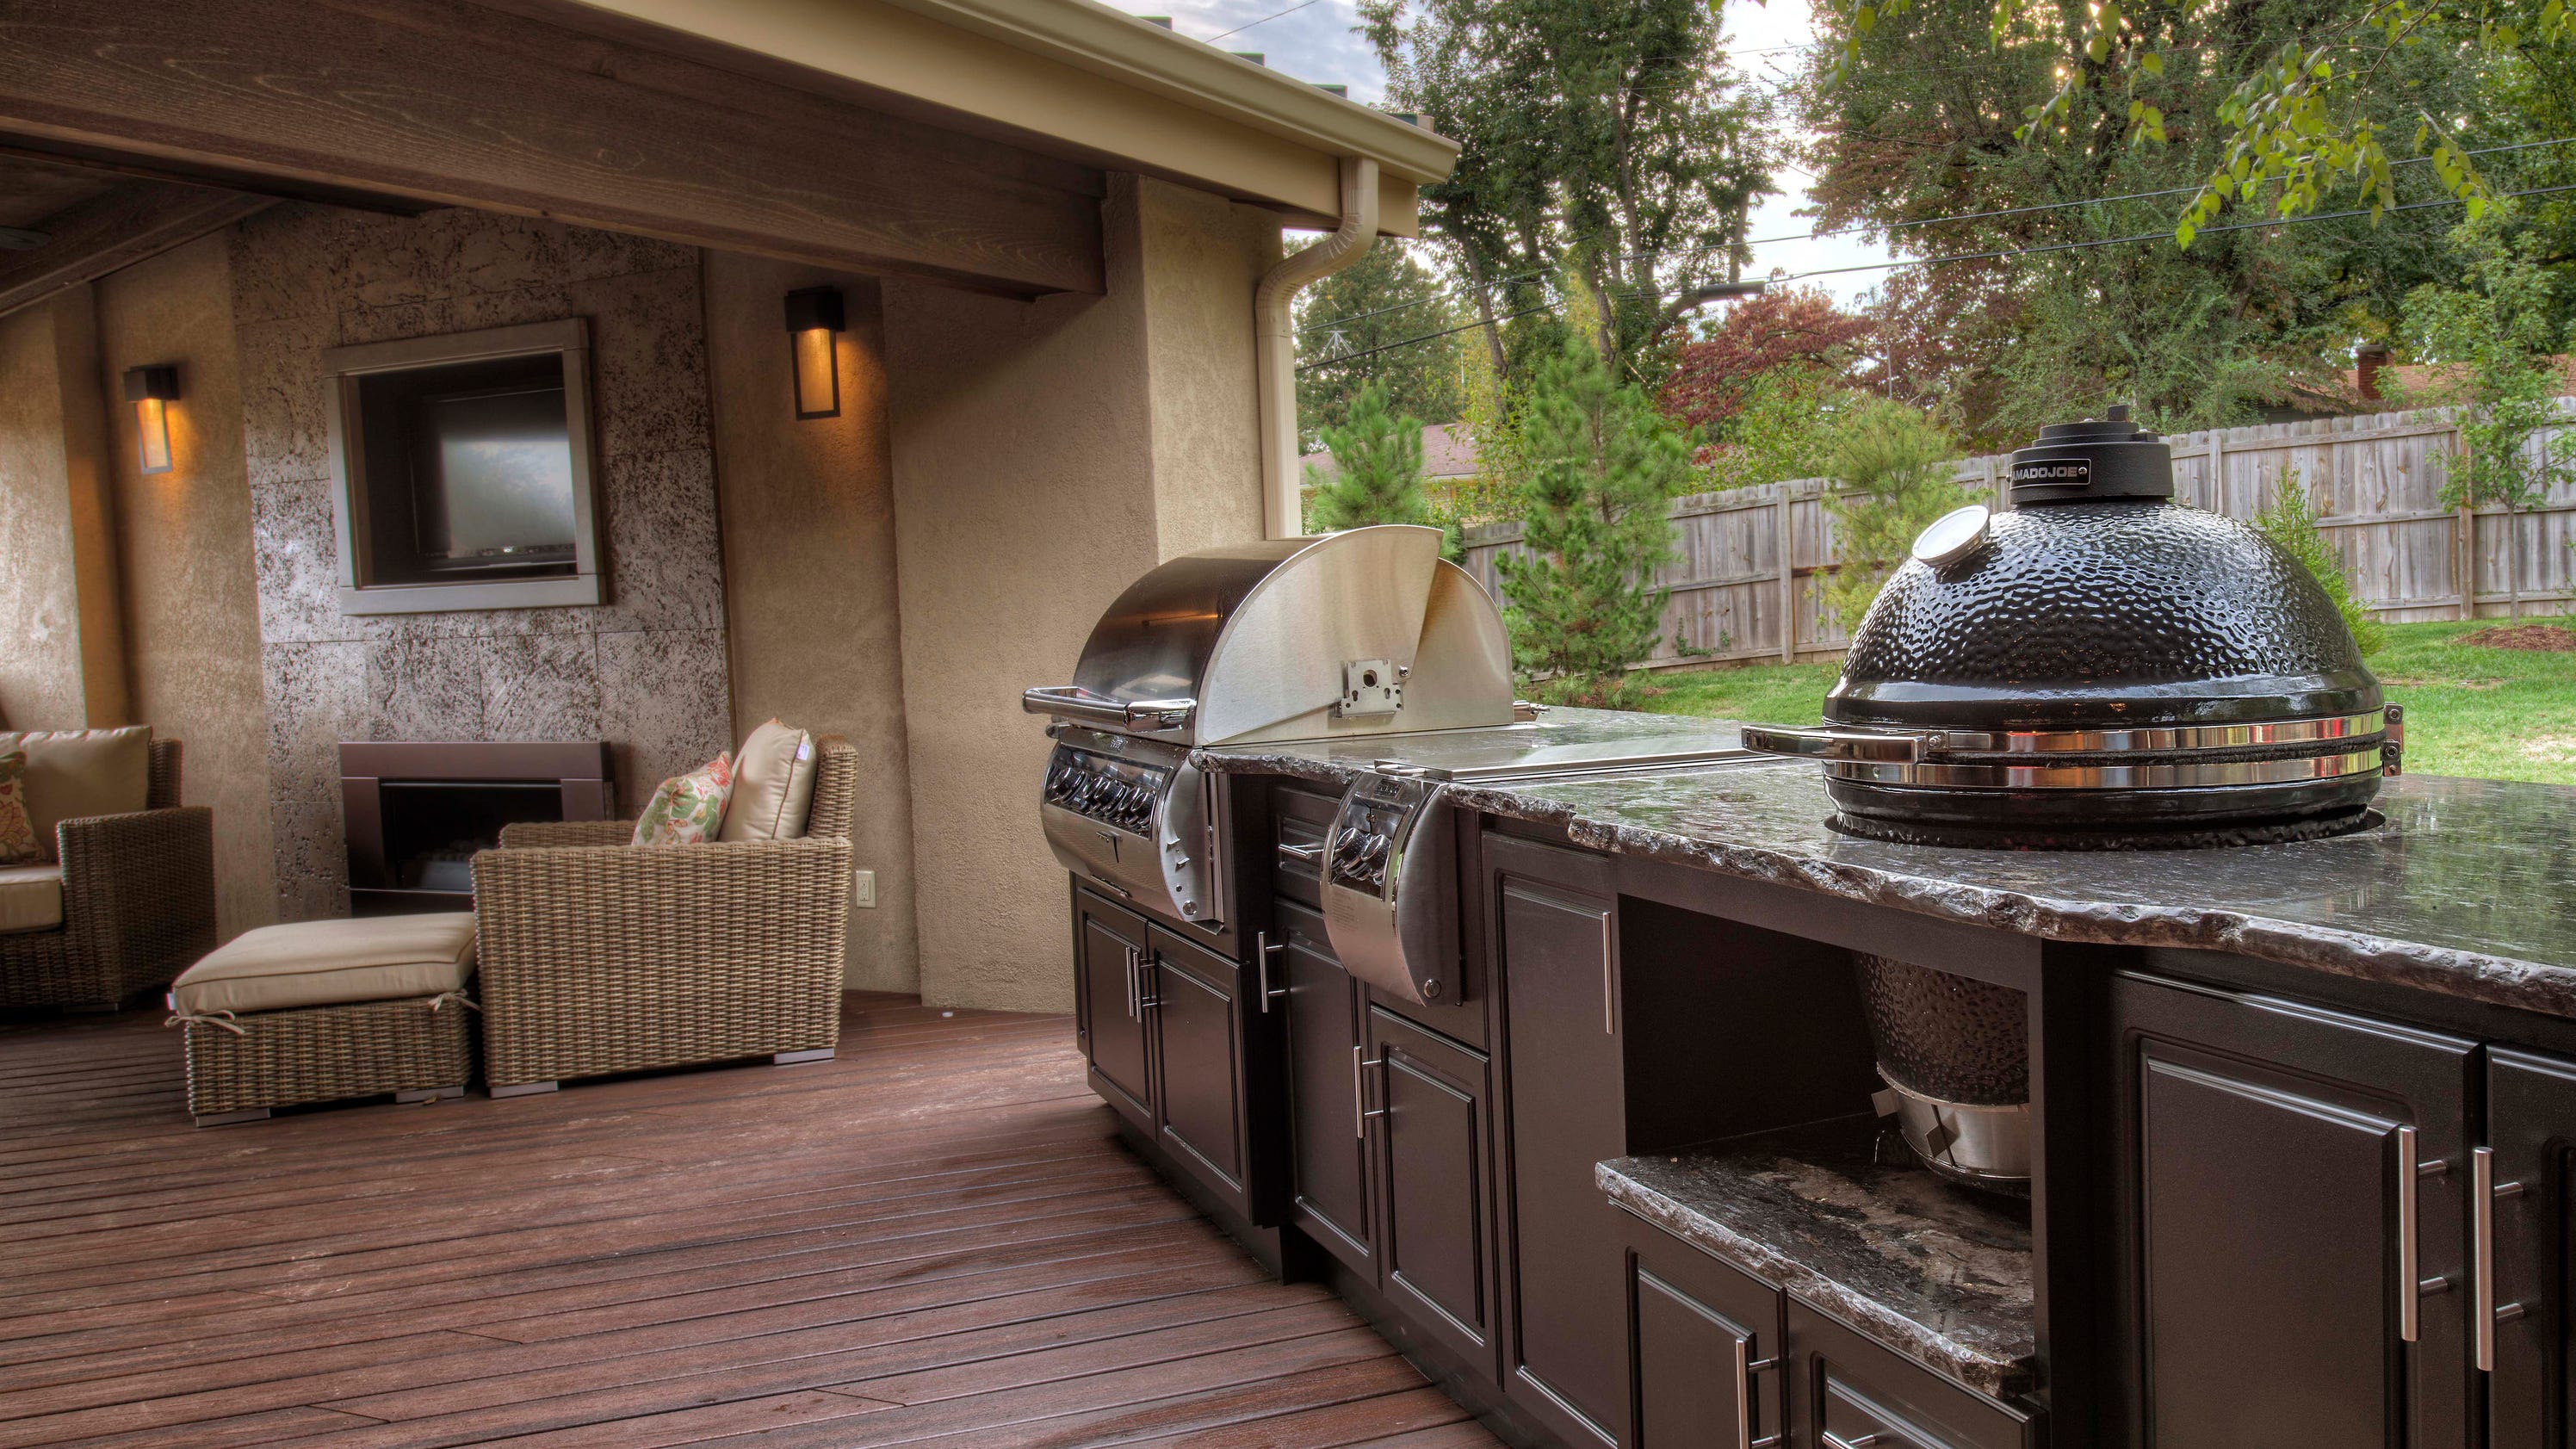 Company makes functional beautiful outdoor kitchens